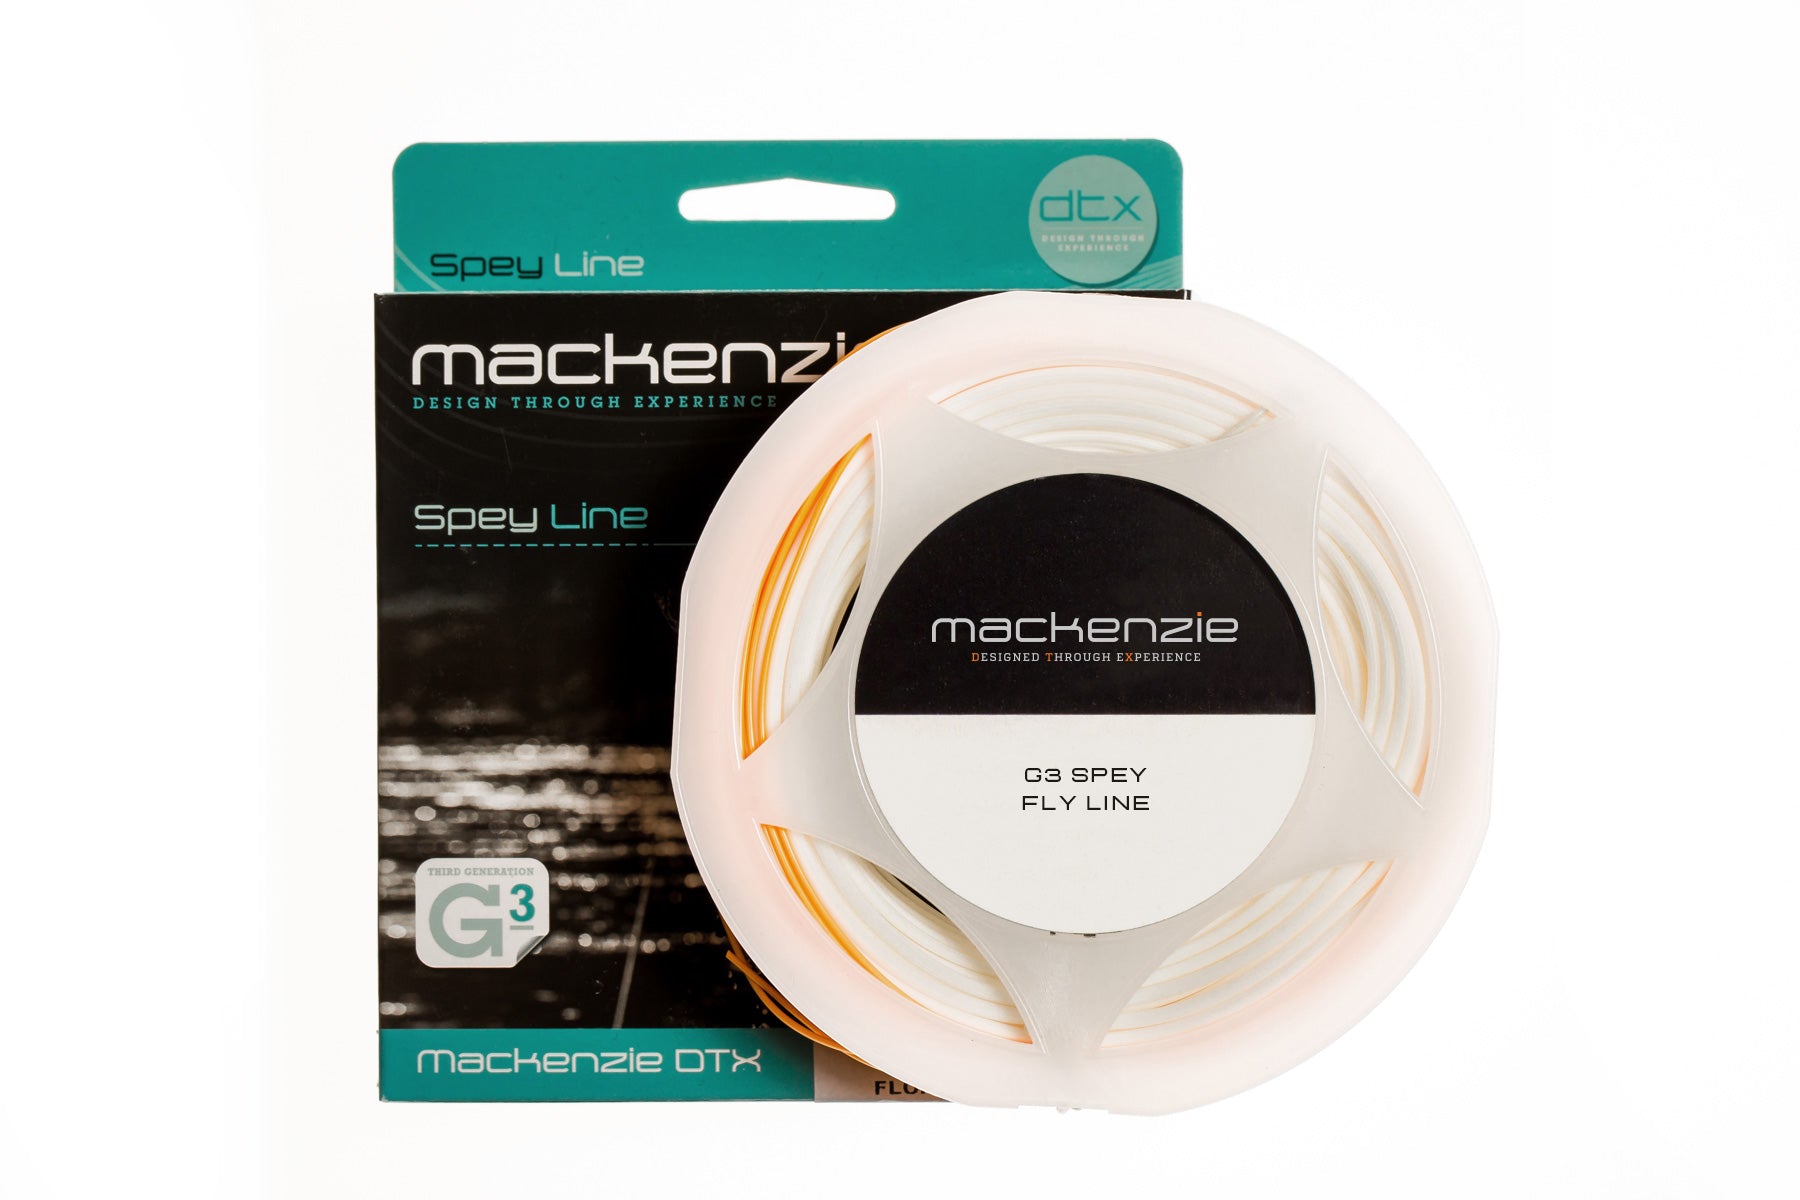 Fly Fishing Line, Spey Fly Line, Fishing Float